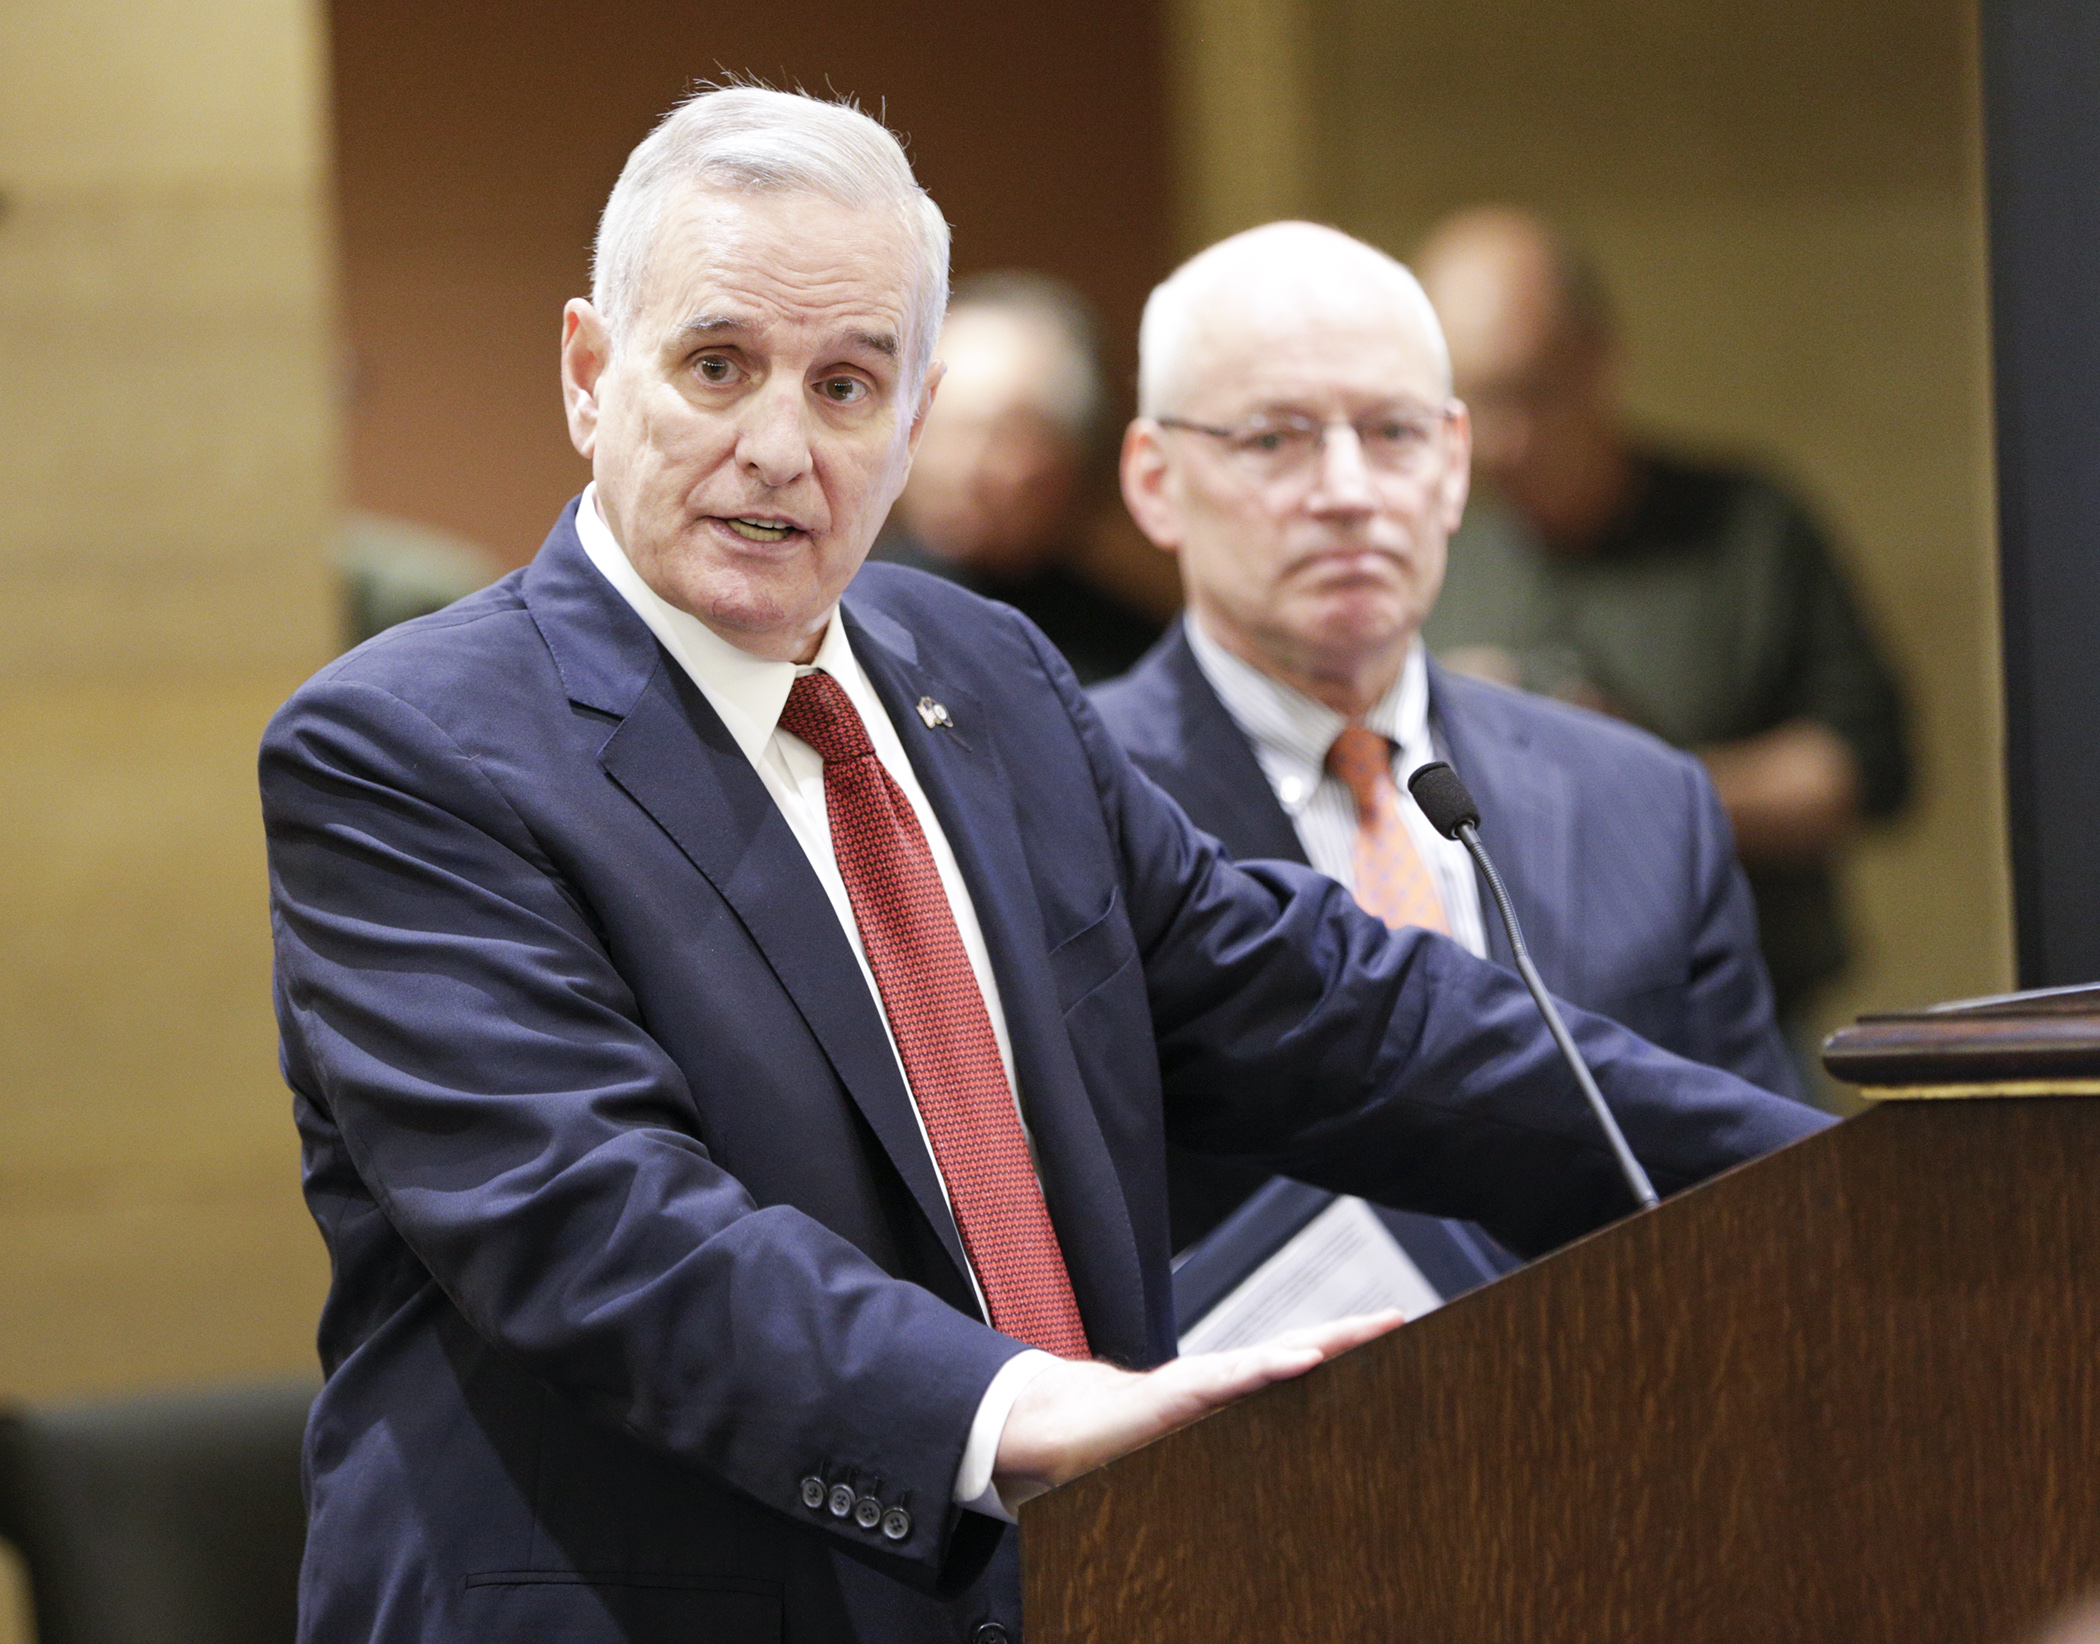 Gov. Mark Dayton answers a reporter’s question during a Jan. 24 presentation of his biennial budget proposal. After the presentation, Dayton revealed he has prostate cancer. Photo by Paul Battaglia